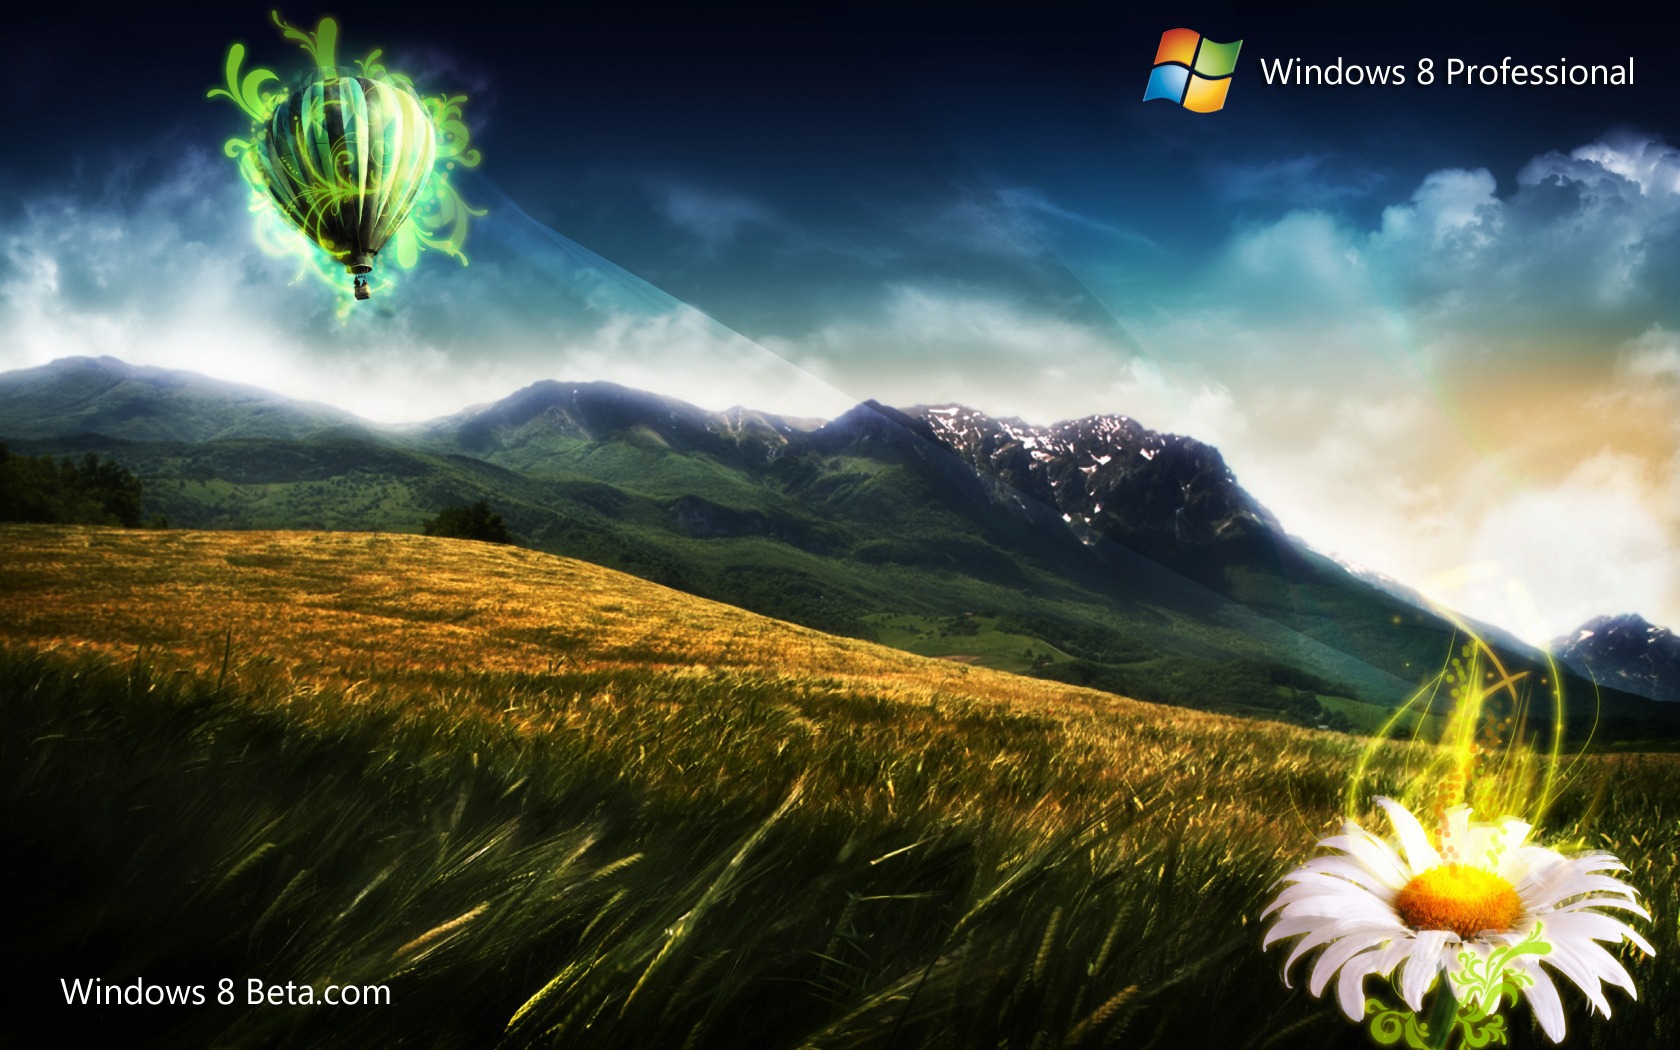 Nature Windows 8 Free Wallpapers Free HD Wallpapers, Images, Stock ...